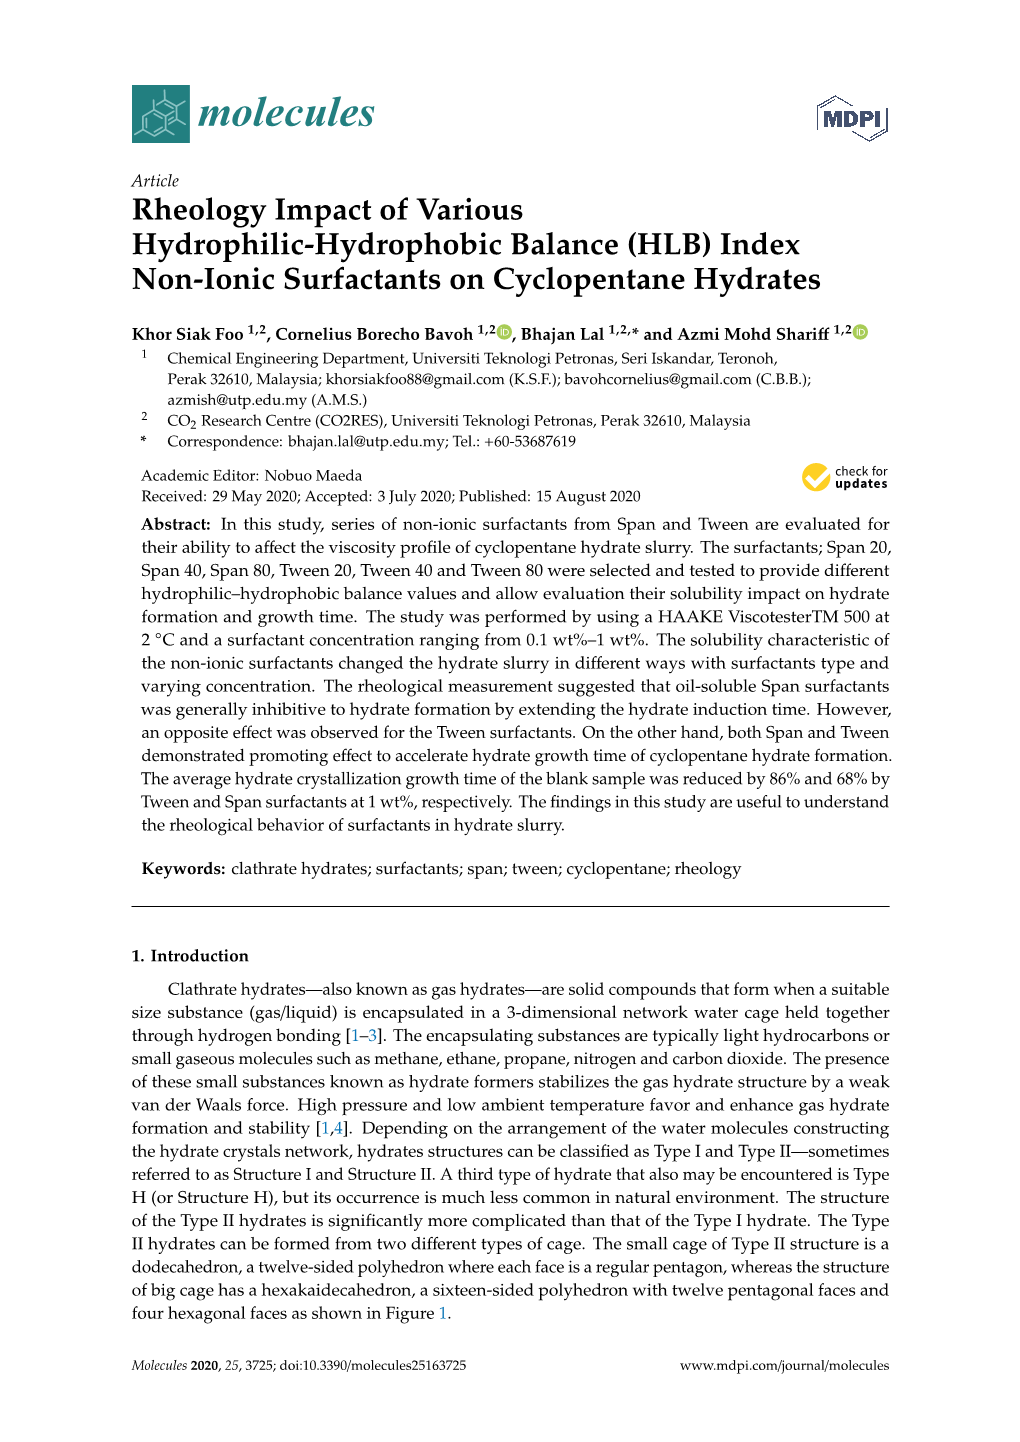 (HLB) Index Non-Ionic Surfactants on Cyclopentane Hydrates